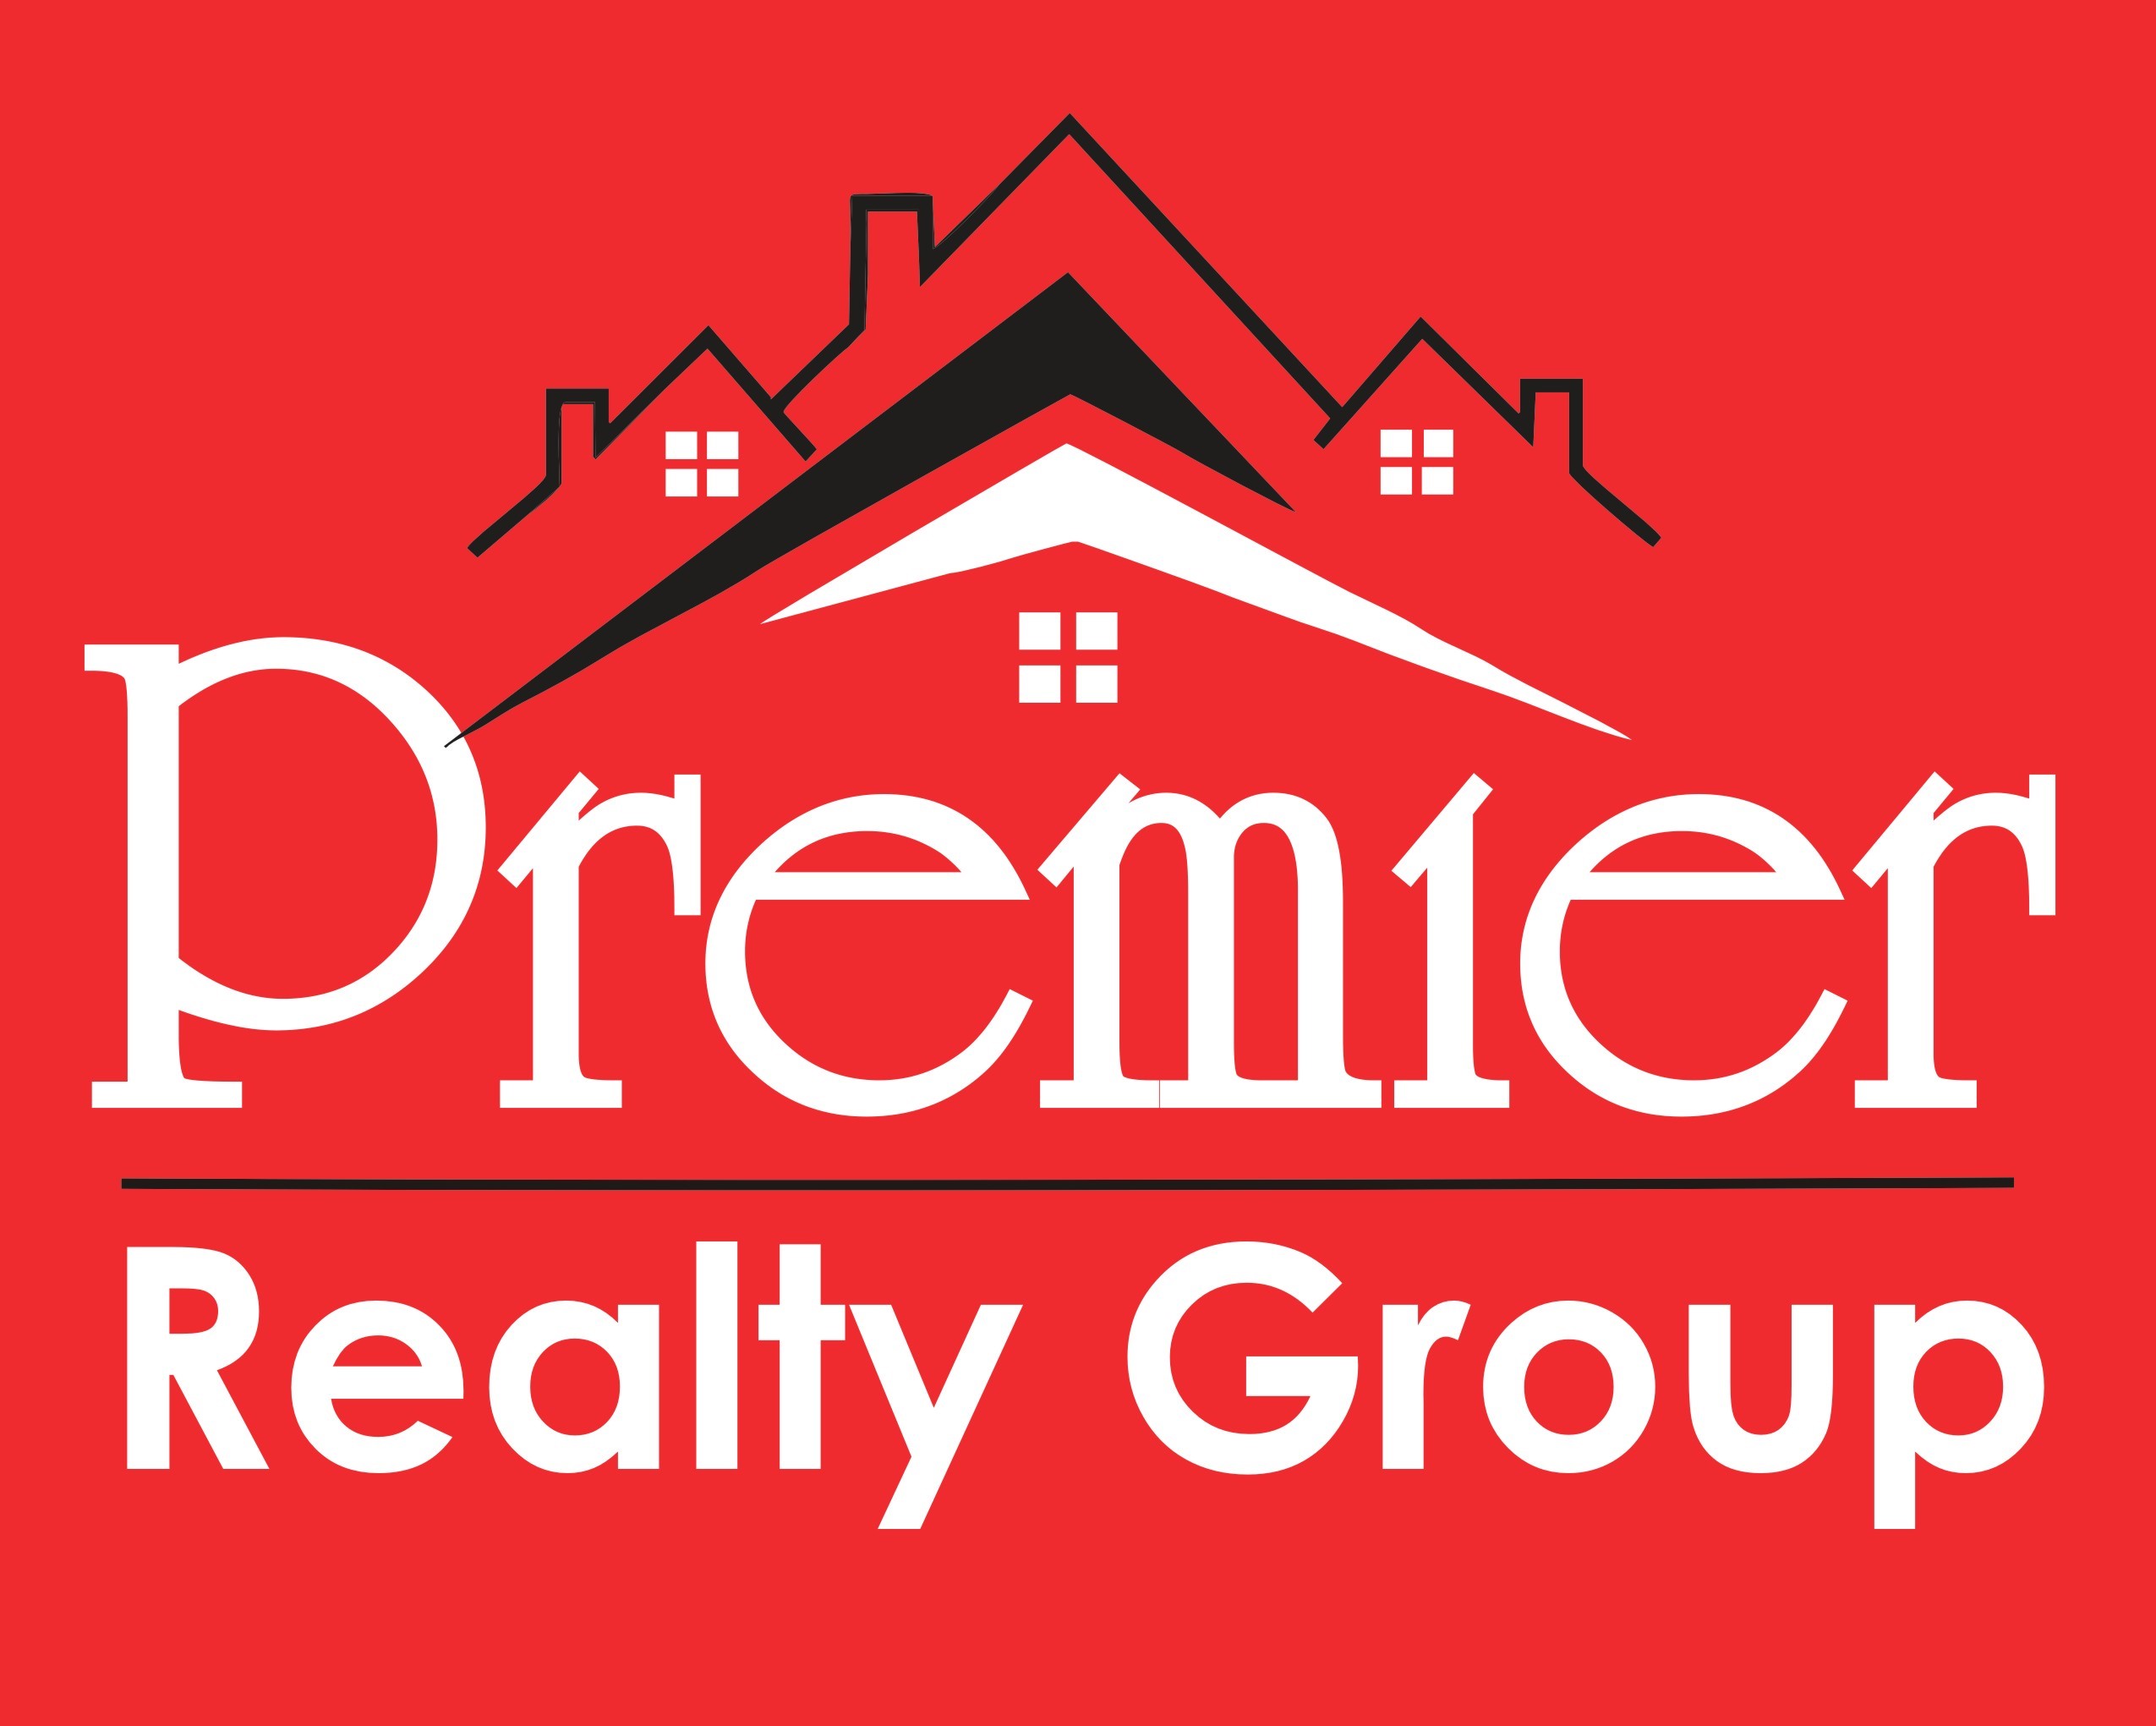 Premier Realty Group